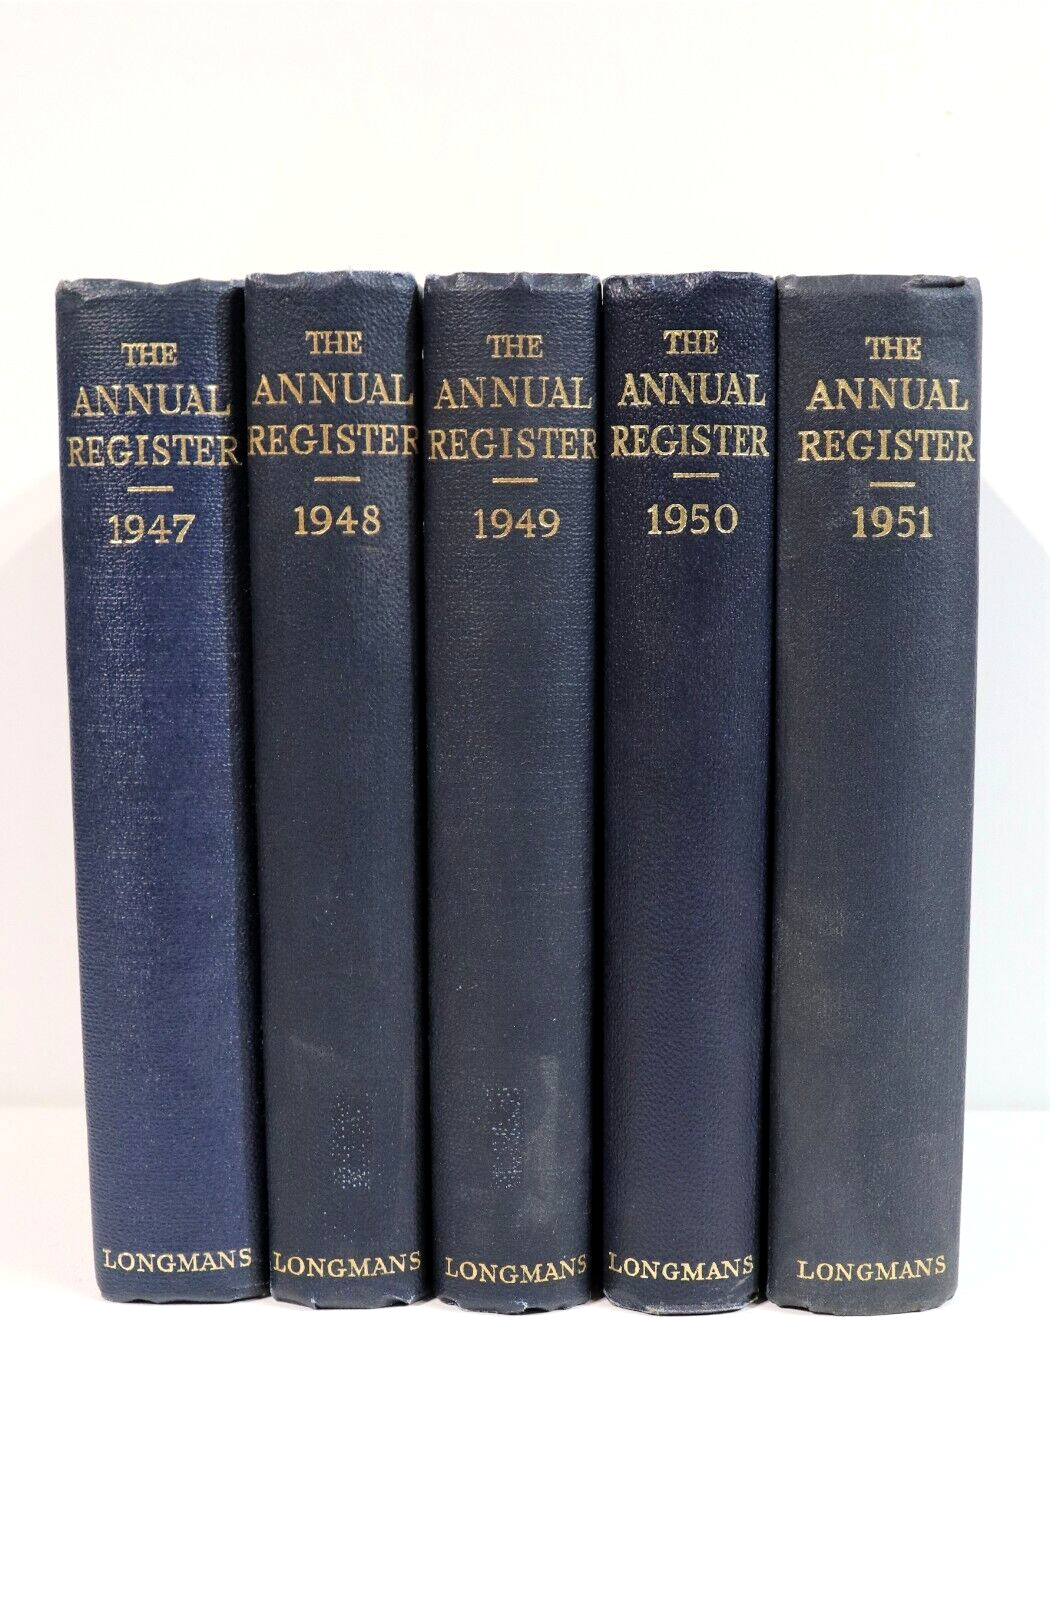 The Annual Register For Years 1947 to 1951 - 5 Vols. World History Books